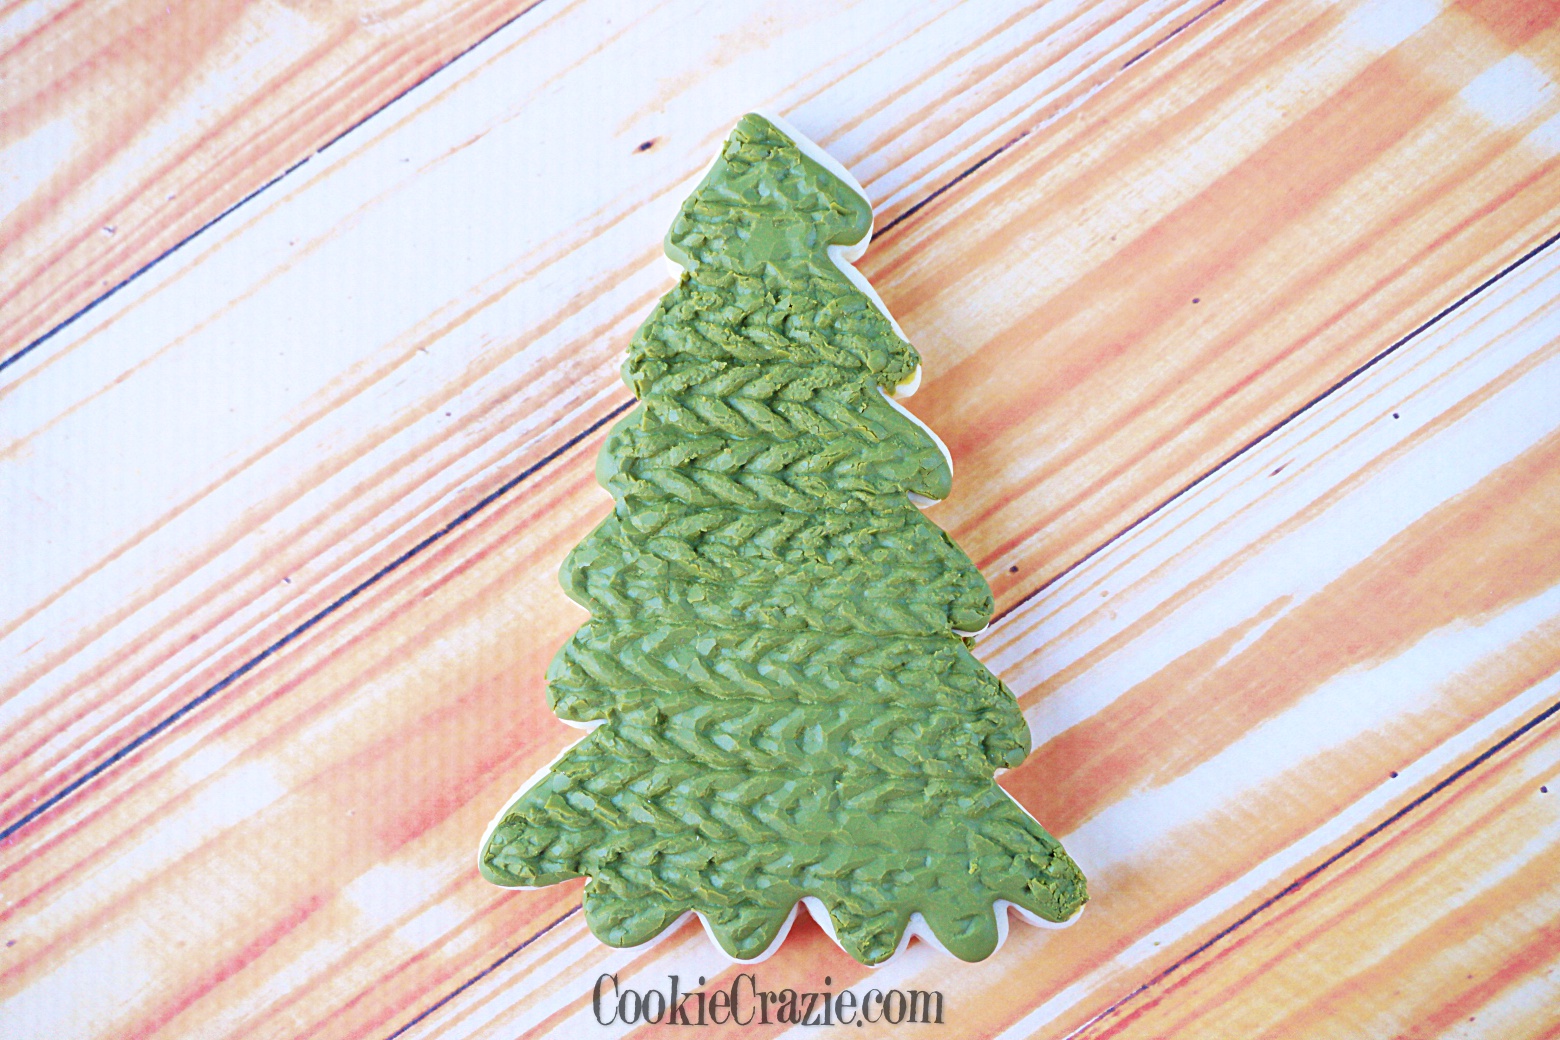  Knitted Christmas Tree Decorated Sugar Cookie YouTube video HERE 